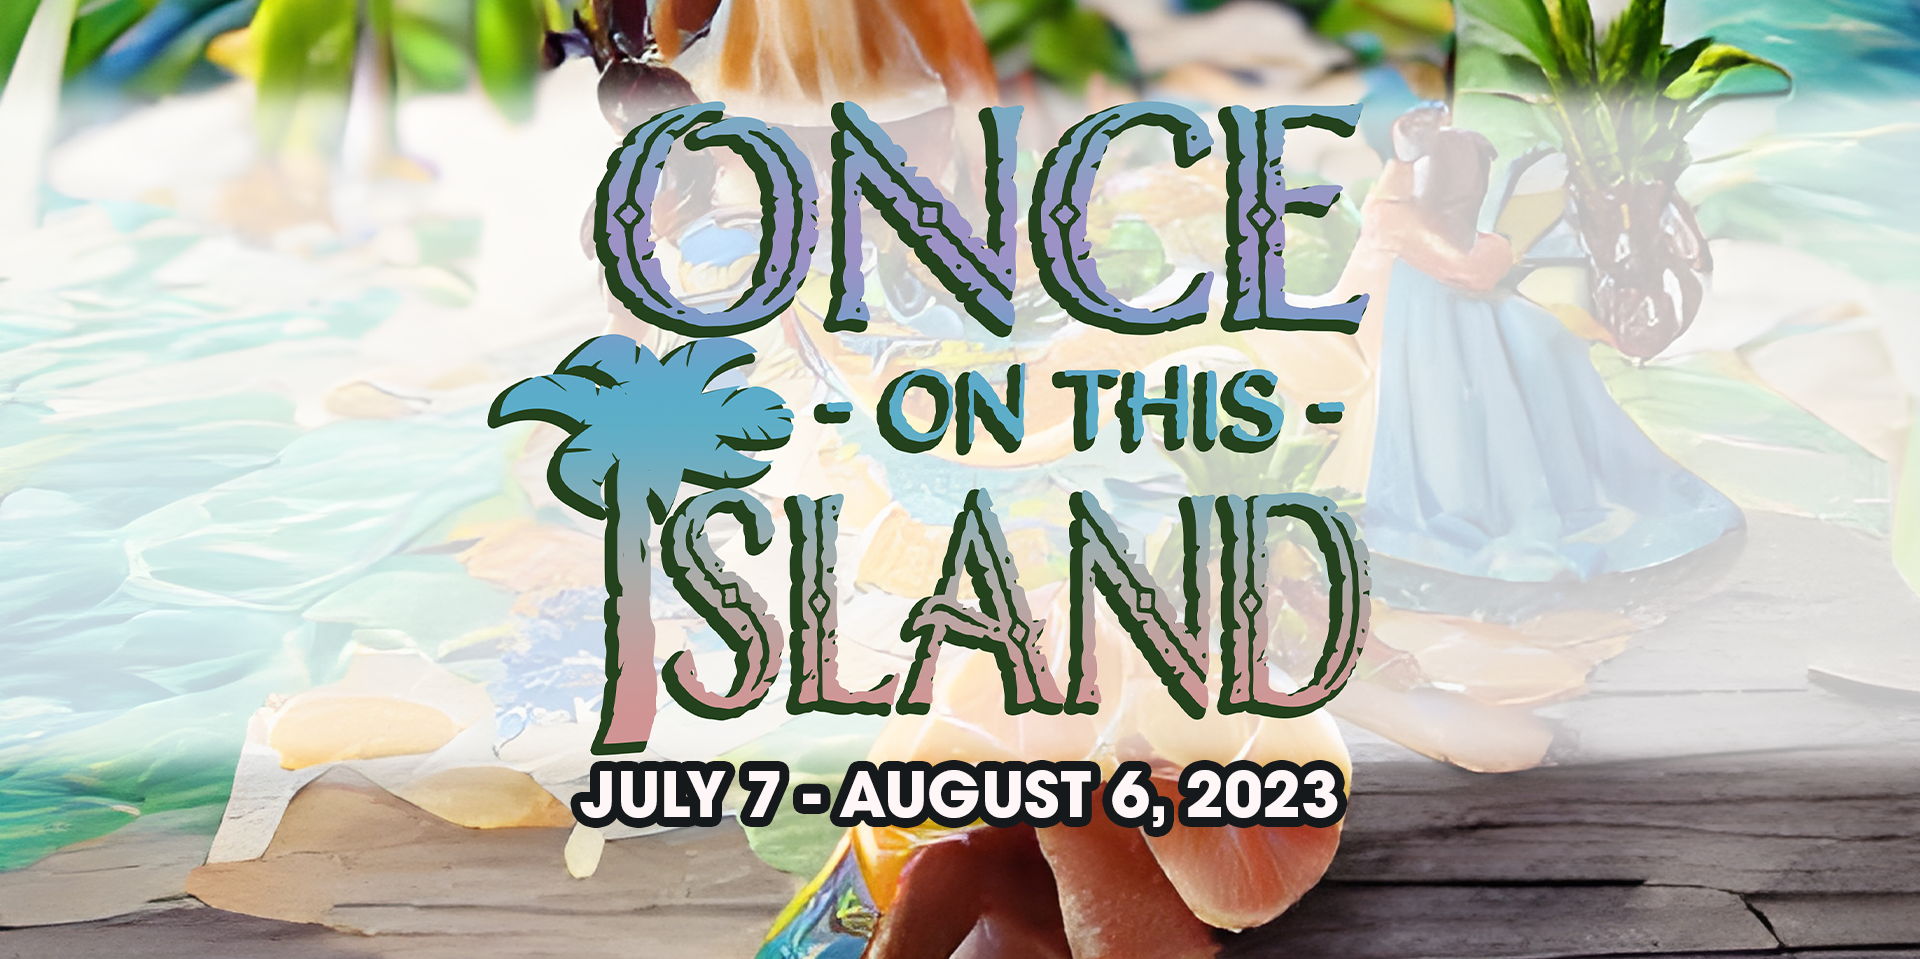 Once On This Island promotional image